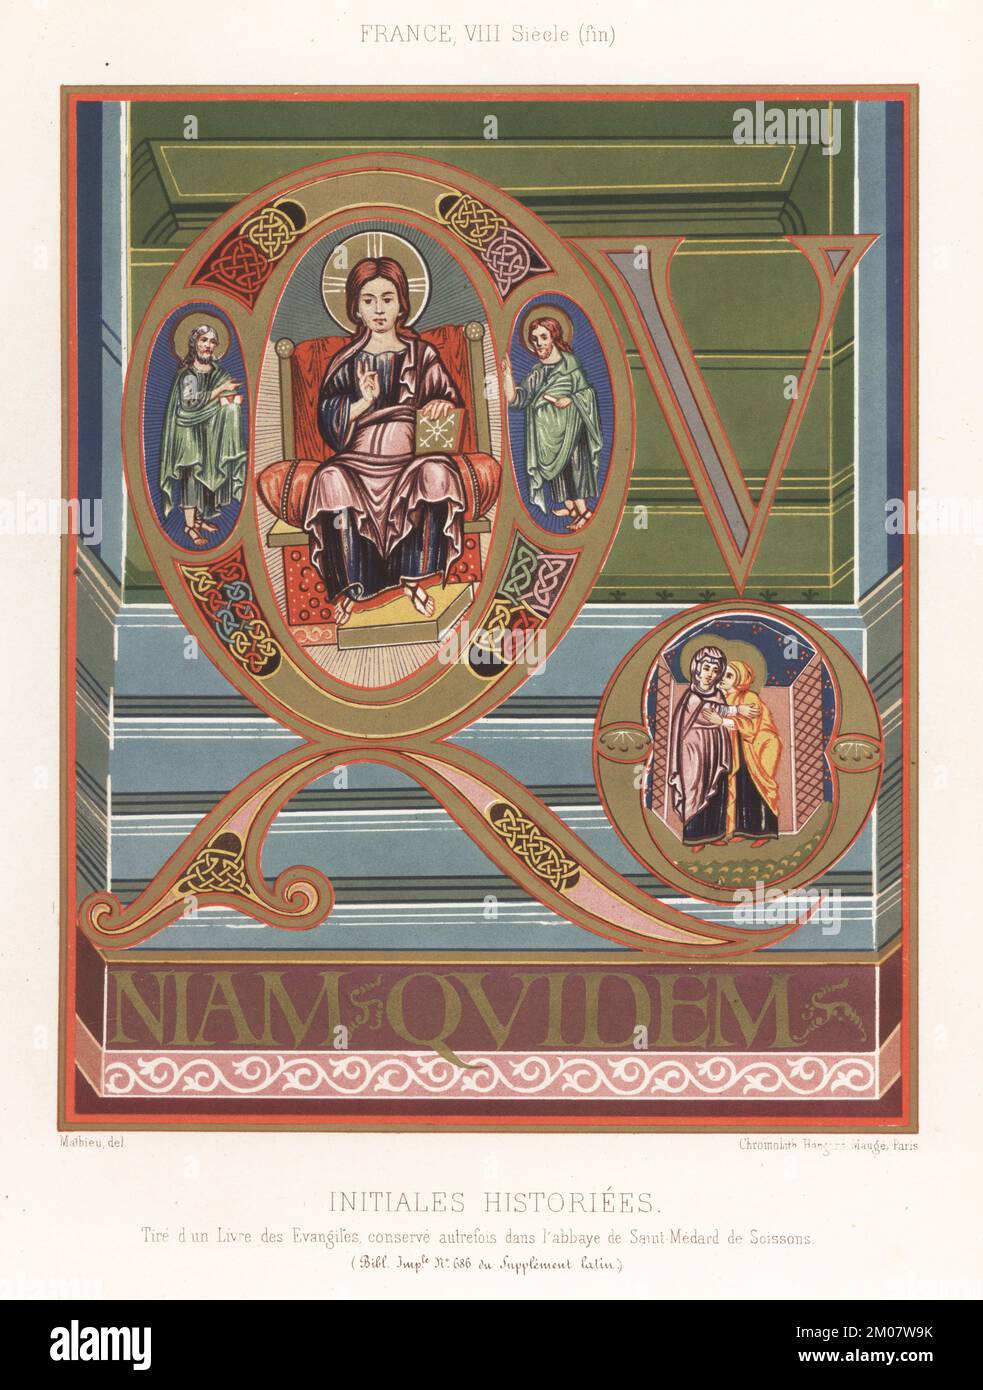 Illuminated initial letters showing end of 8th century French costume. Jesus Christ with evangelists Luke and Paul in Q, Annunciation scene with Mary and an angel in O. Initiales Historiees, France, VIIIe siecle (fin). Taken from a manuscript formerly kept at the Abbey of Saint-Medard de Soissons. MS 686 Sup. Latin, Bibliotheque Imperiale. Chromolithograph after Mathieu from Charles Louandre’s Les Arts Somptuaires, The Sumptuary Arts, Hangard-Mauge, Paris, 1858. Stock Photo